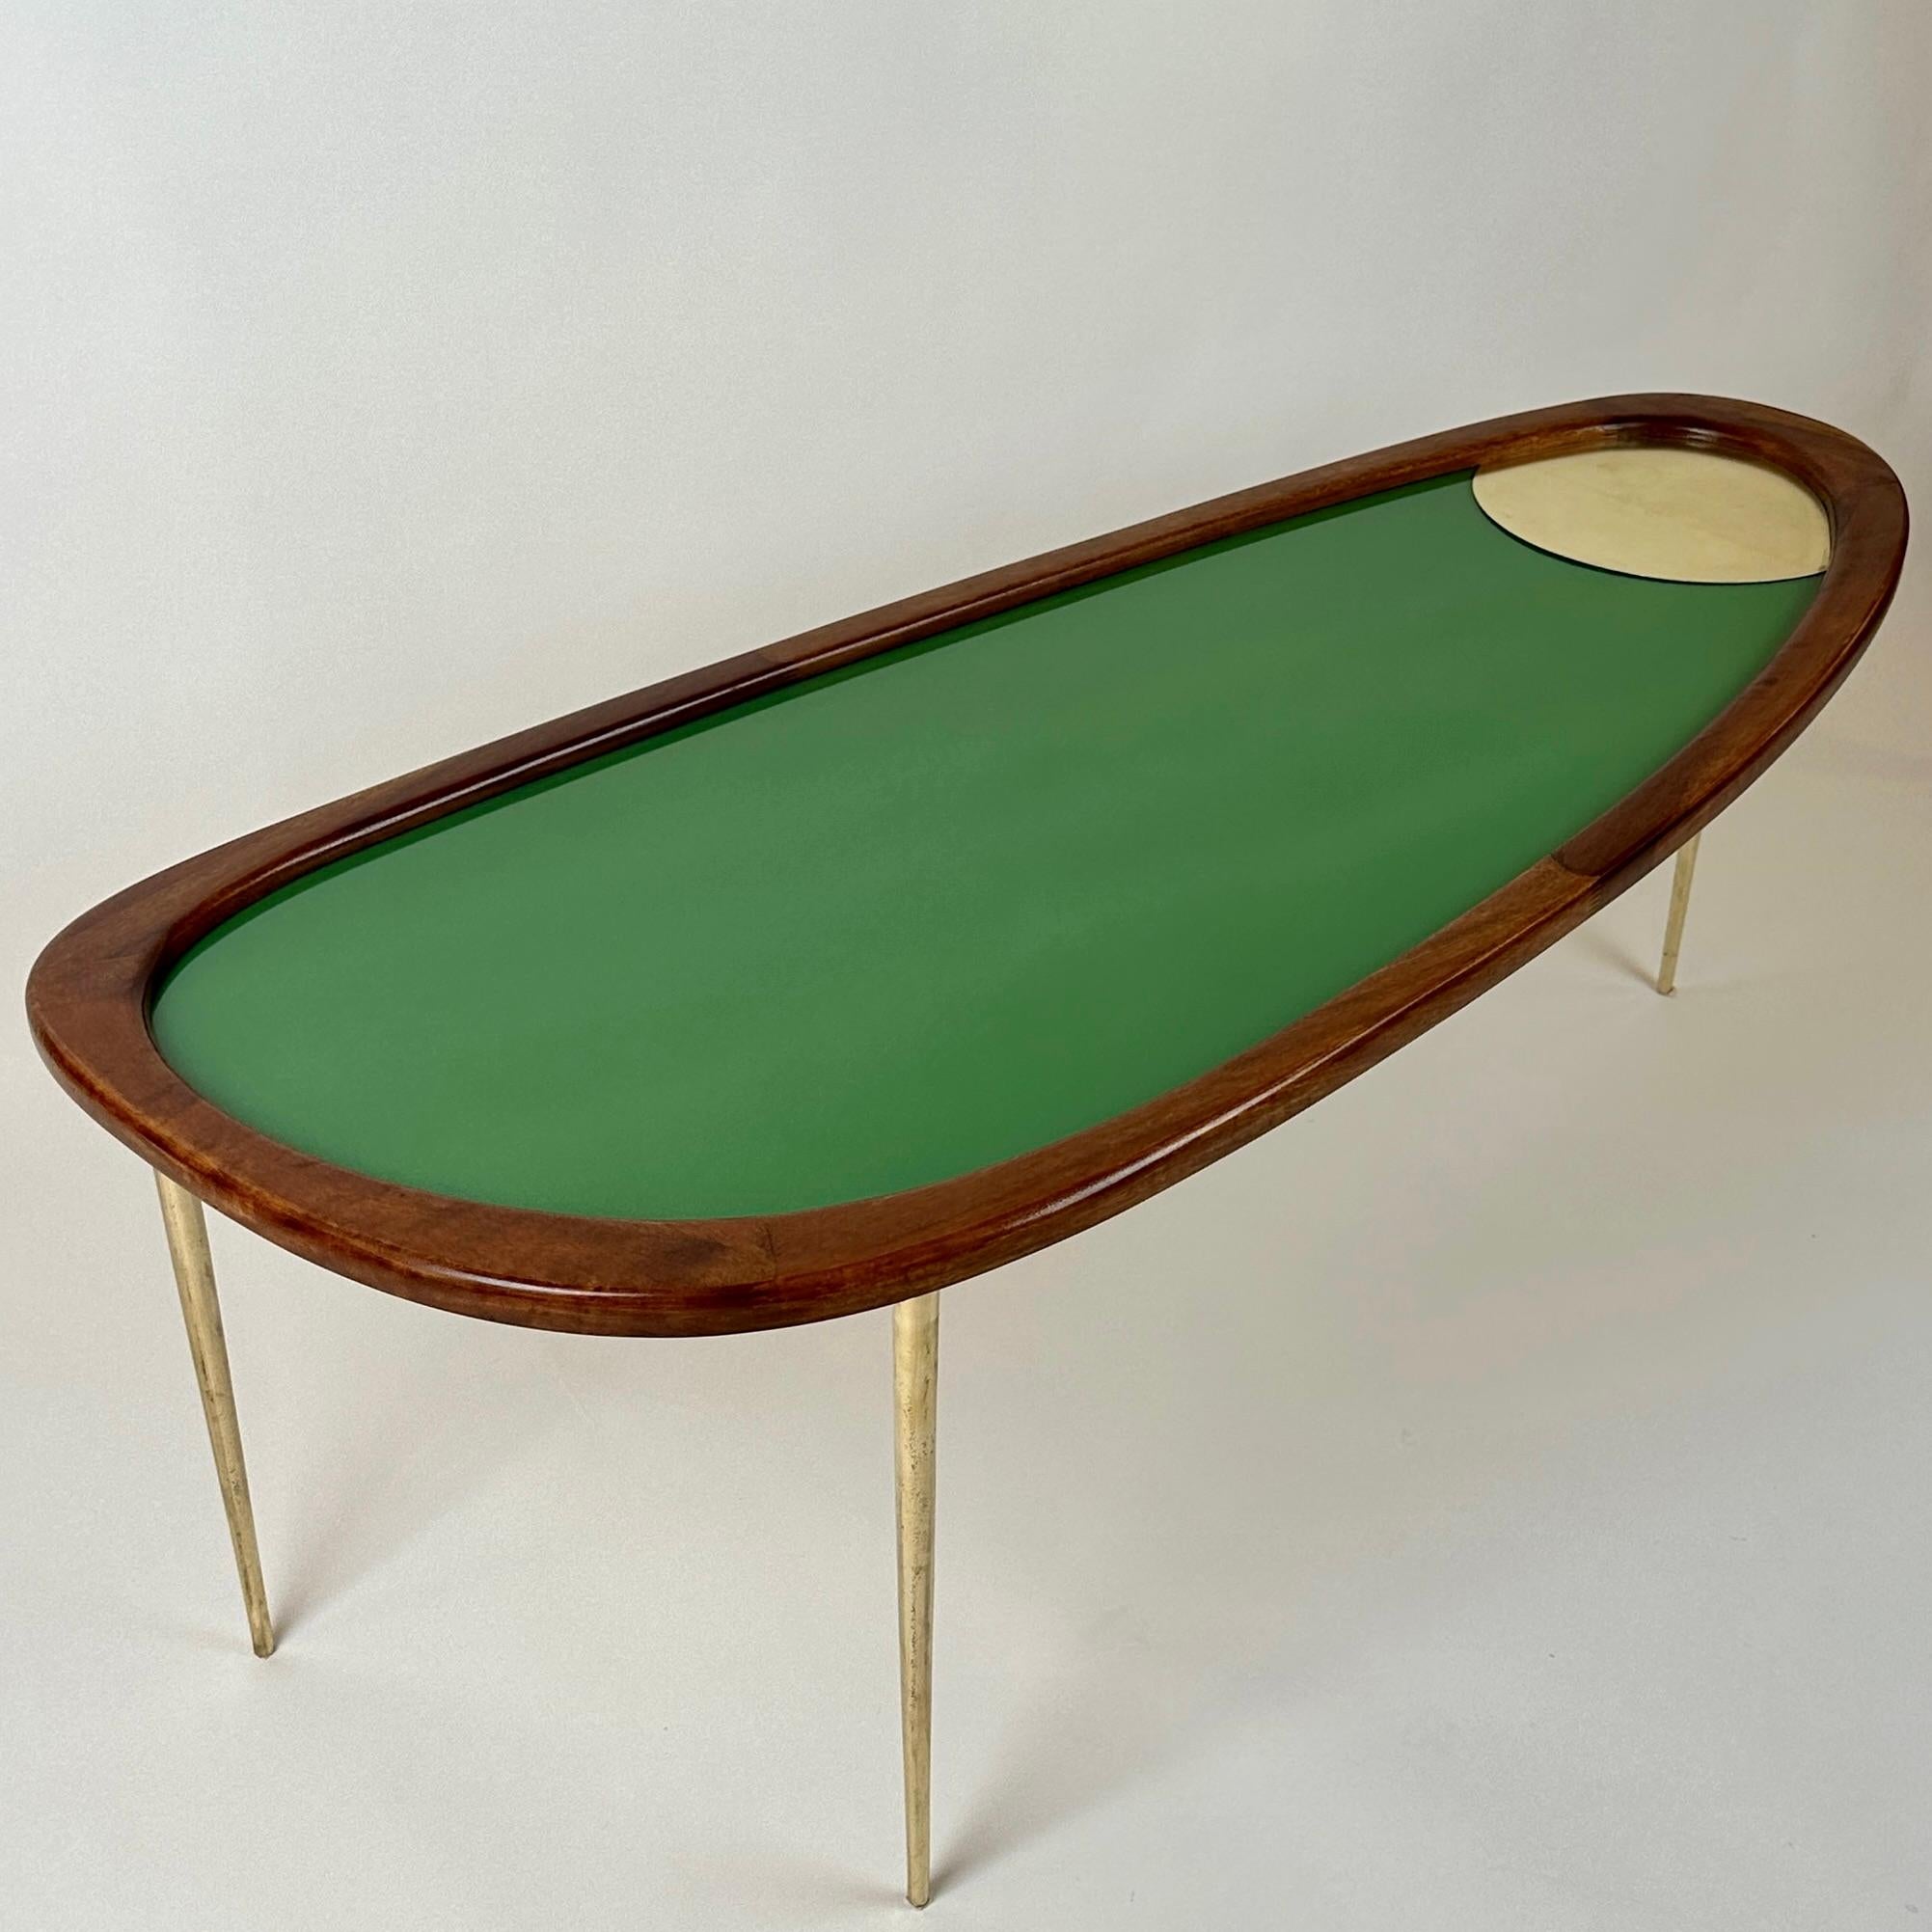 Amorphous shape coffee table made of brown ash tree wood, brass & emerald green opaline glass with brass insert. Three solid brass legs. 
This table can also be combined with another pair of side tables (like in the enclosed picture) and used as a